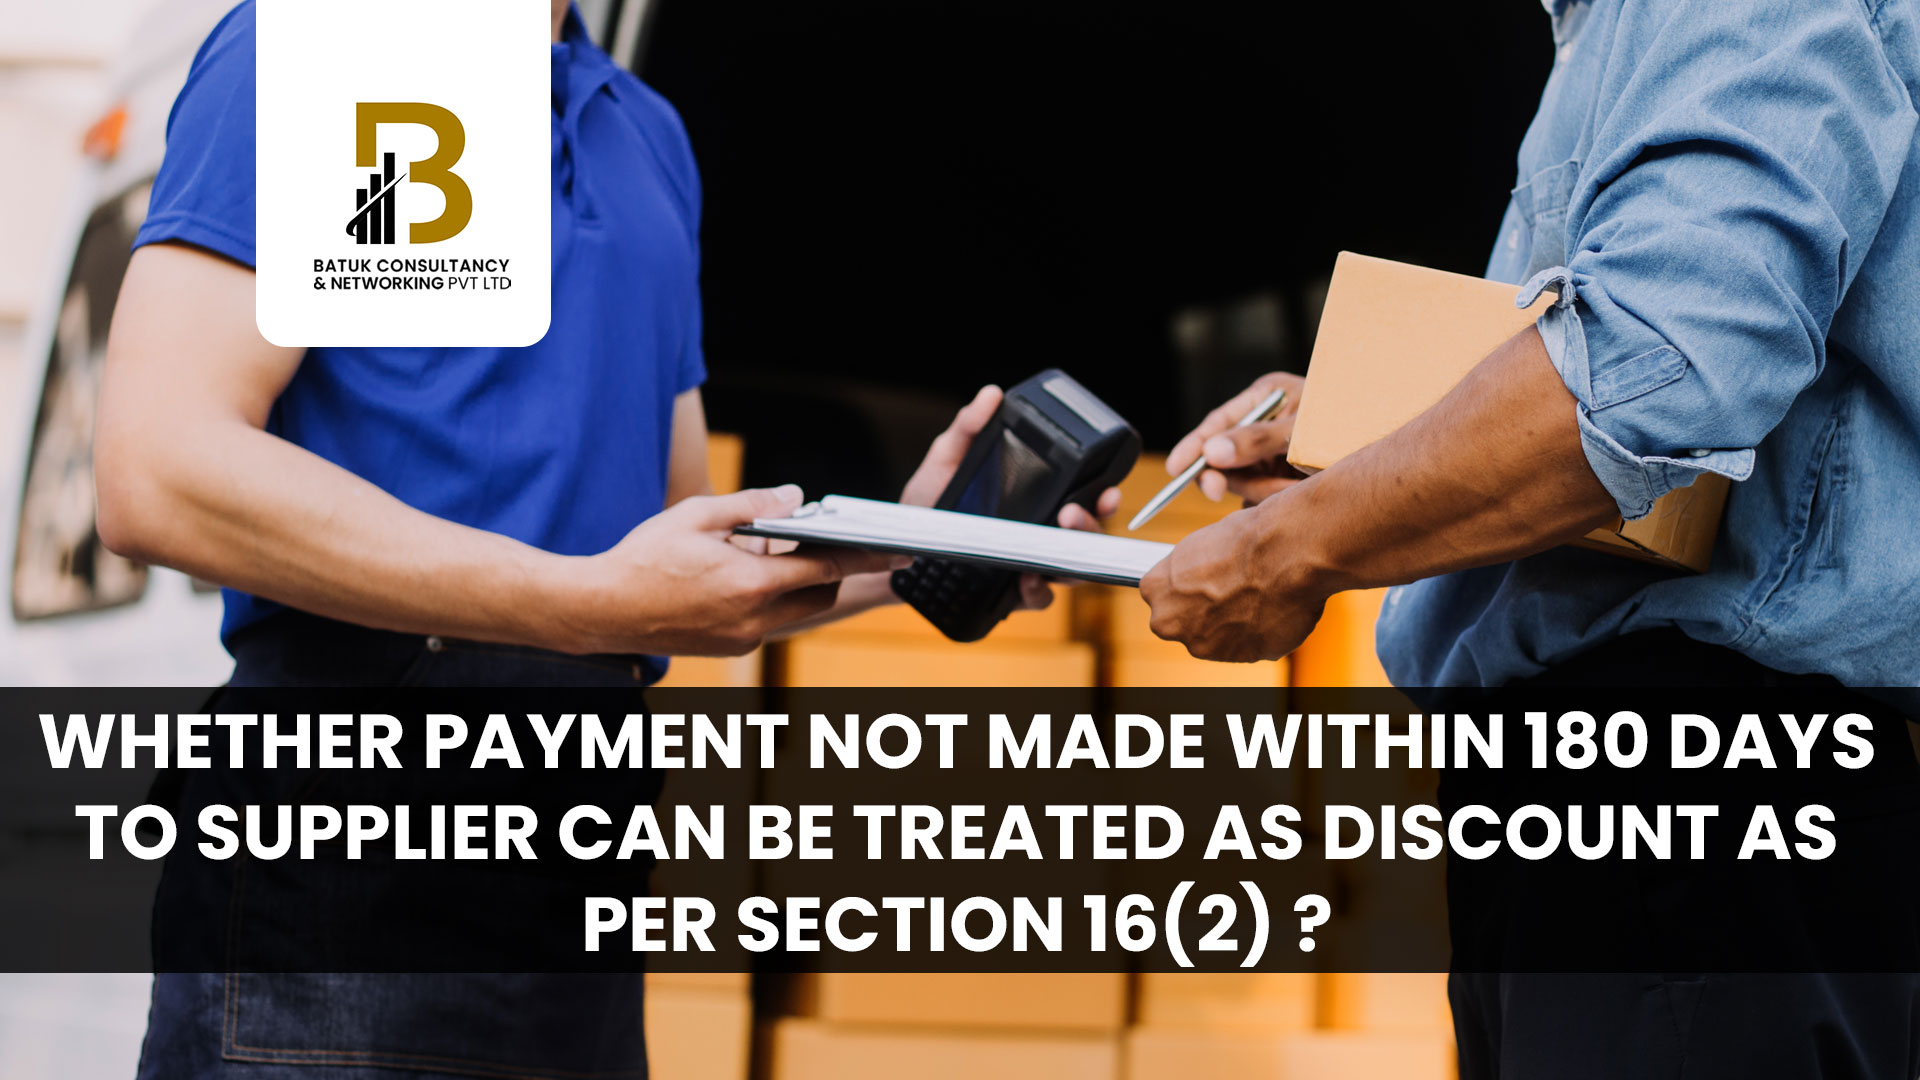 Whether payment not made within 180 days to supplier can be treated as discount as per Section 16(2)